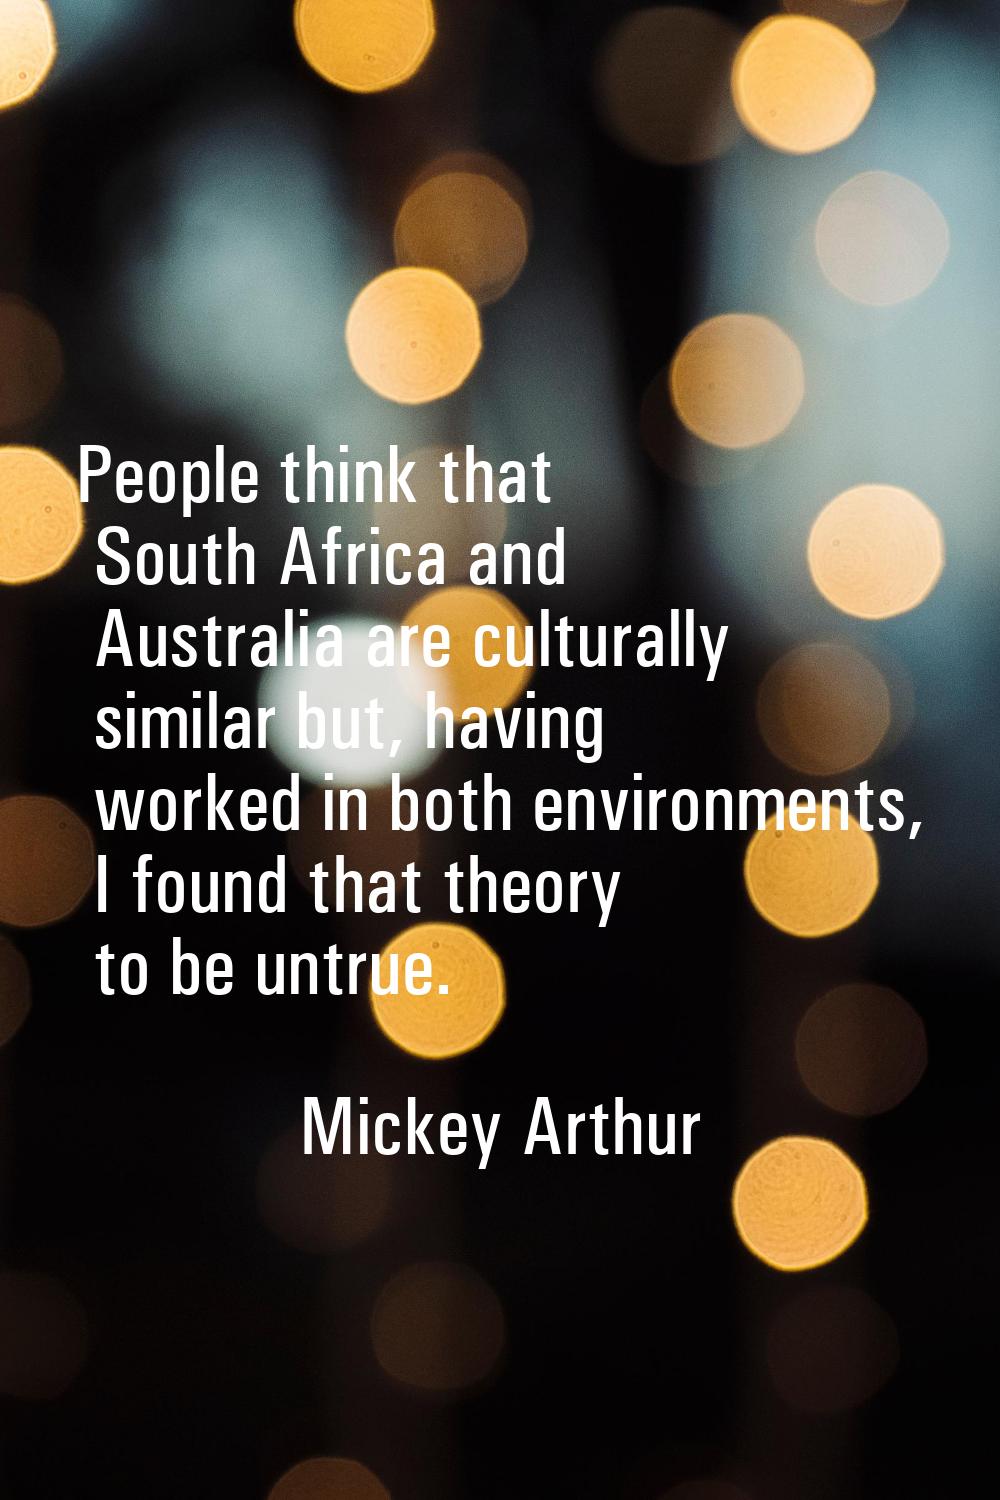 People think that South Africa and Australia are culturally similar but, having worked in both envi